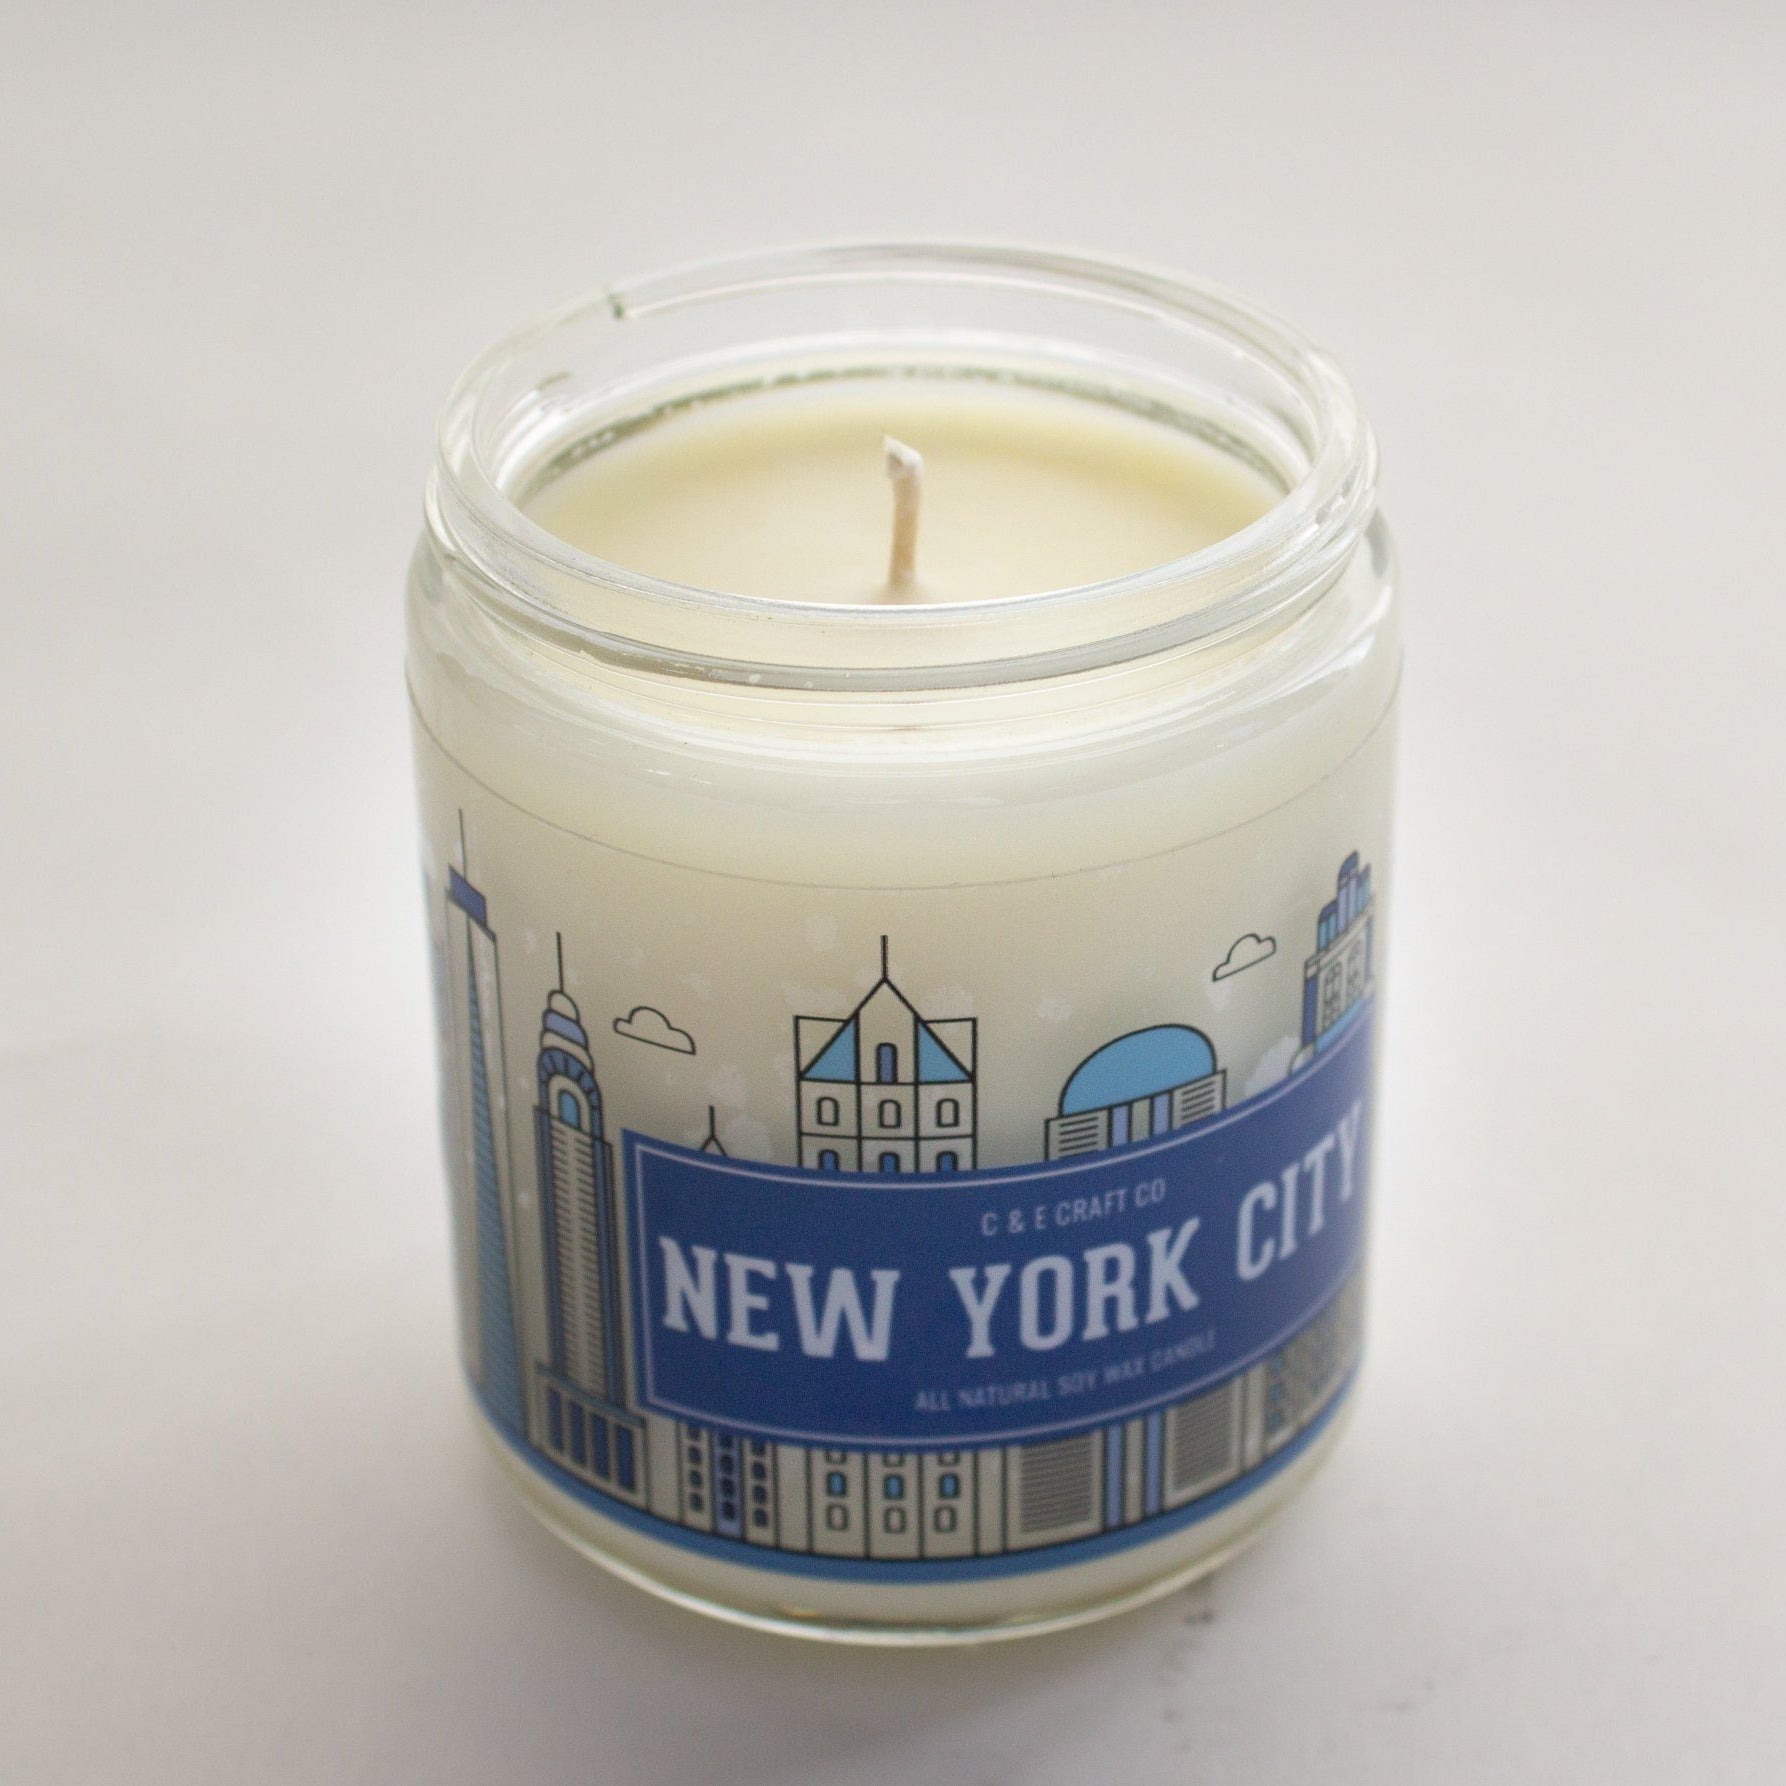 C&E - New York City Skyline - Soy Wax Candle - New York City Gift C & E Craft Co 